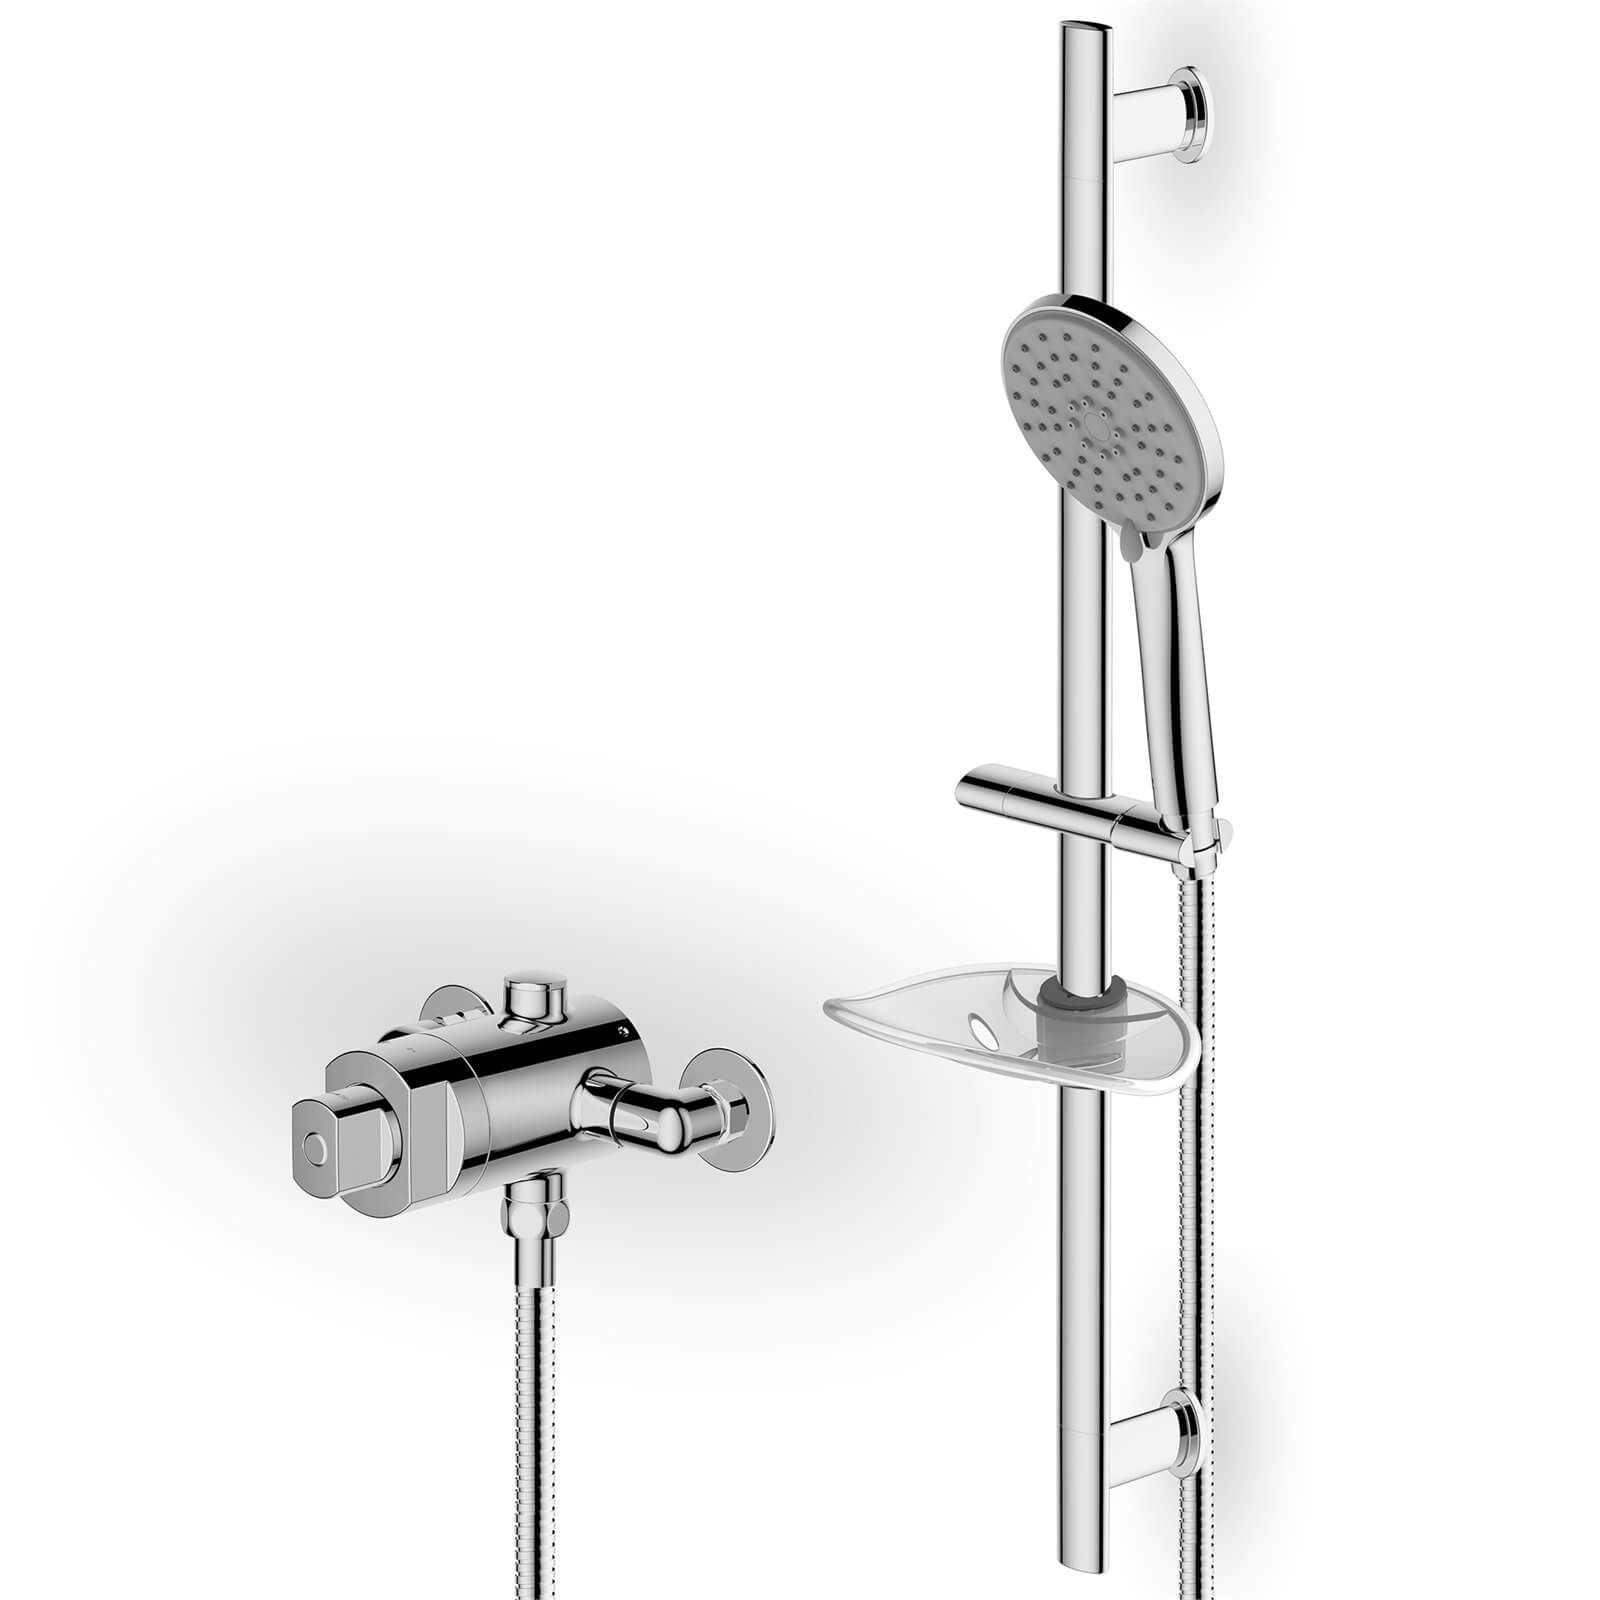 Photo of Glenoe Thermostatic Concentric Mixer Shower Tap - Chrome